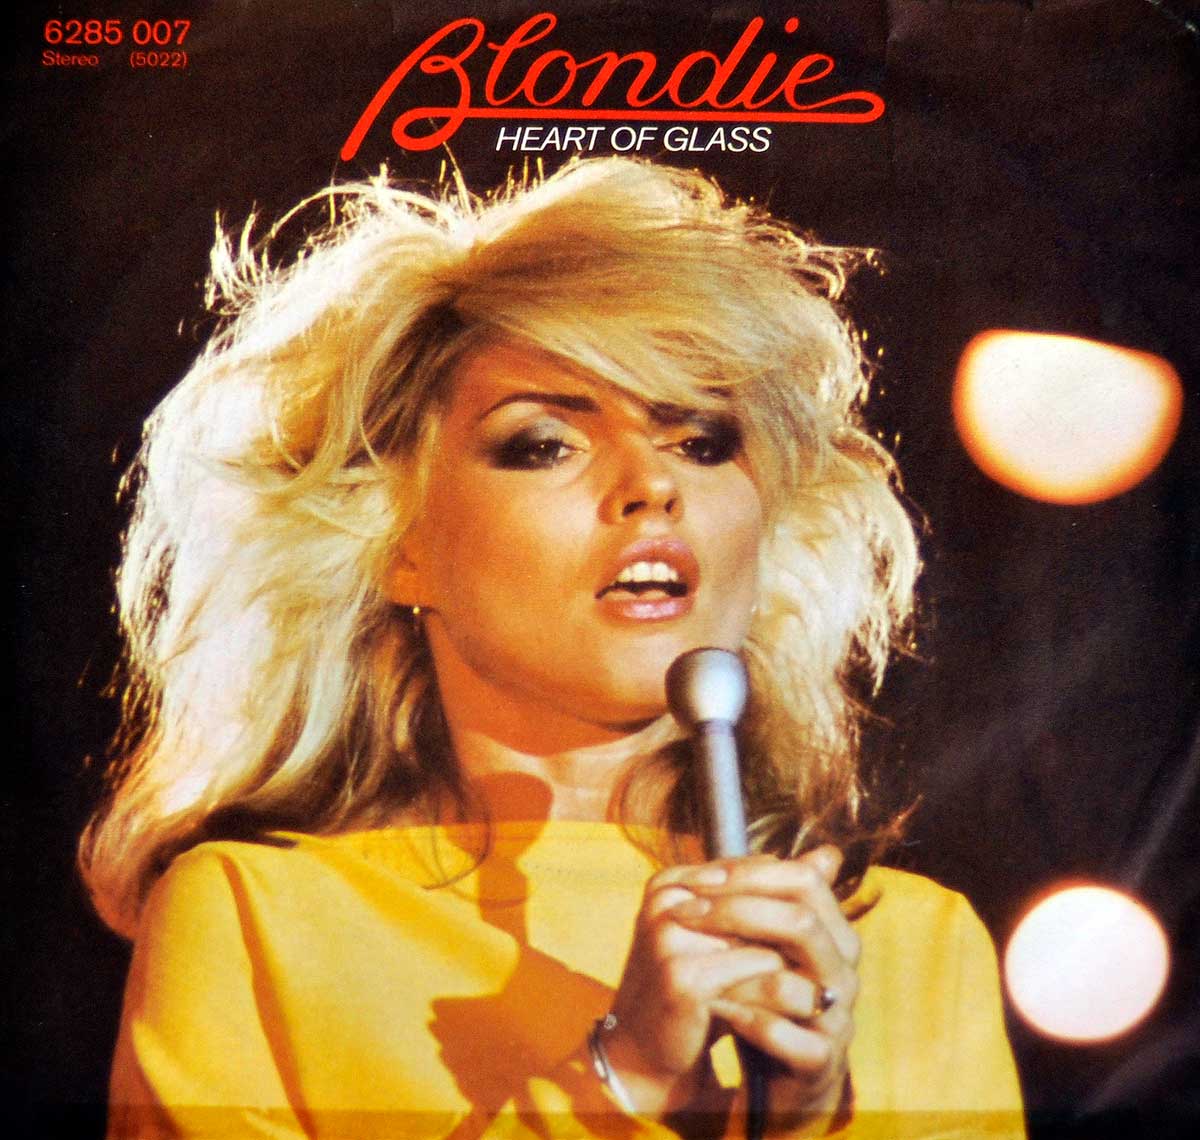 large album front cover photo of: BLONDIE HEART OF GLASS 